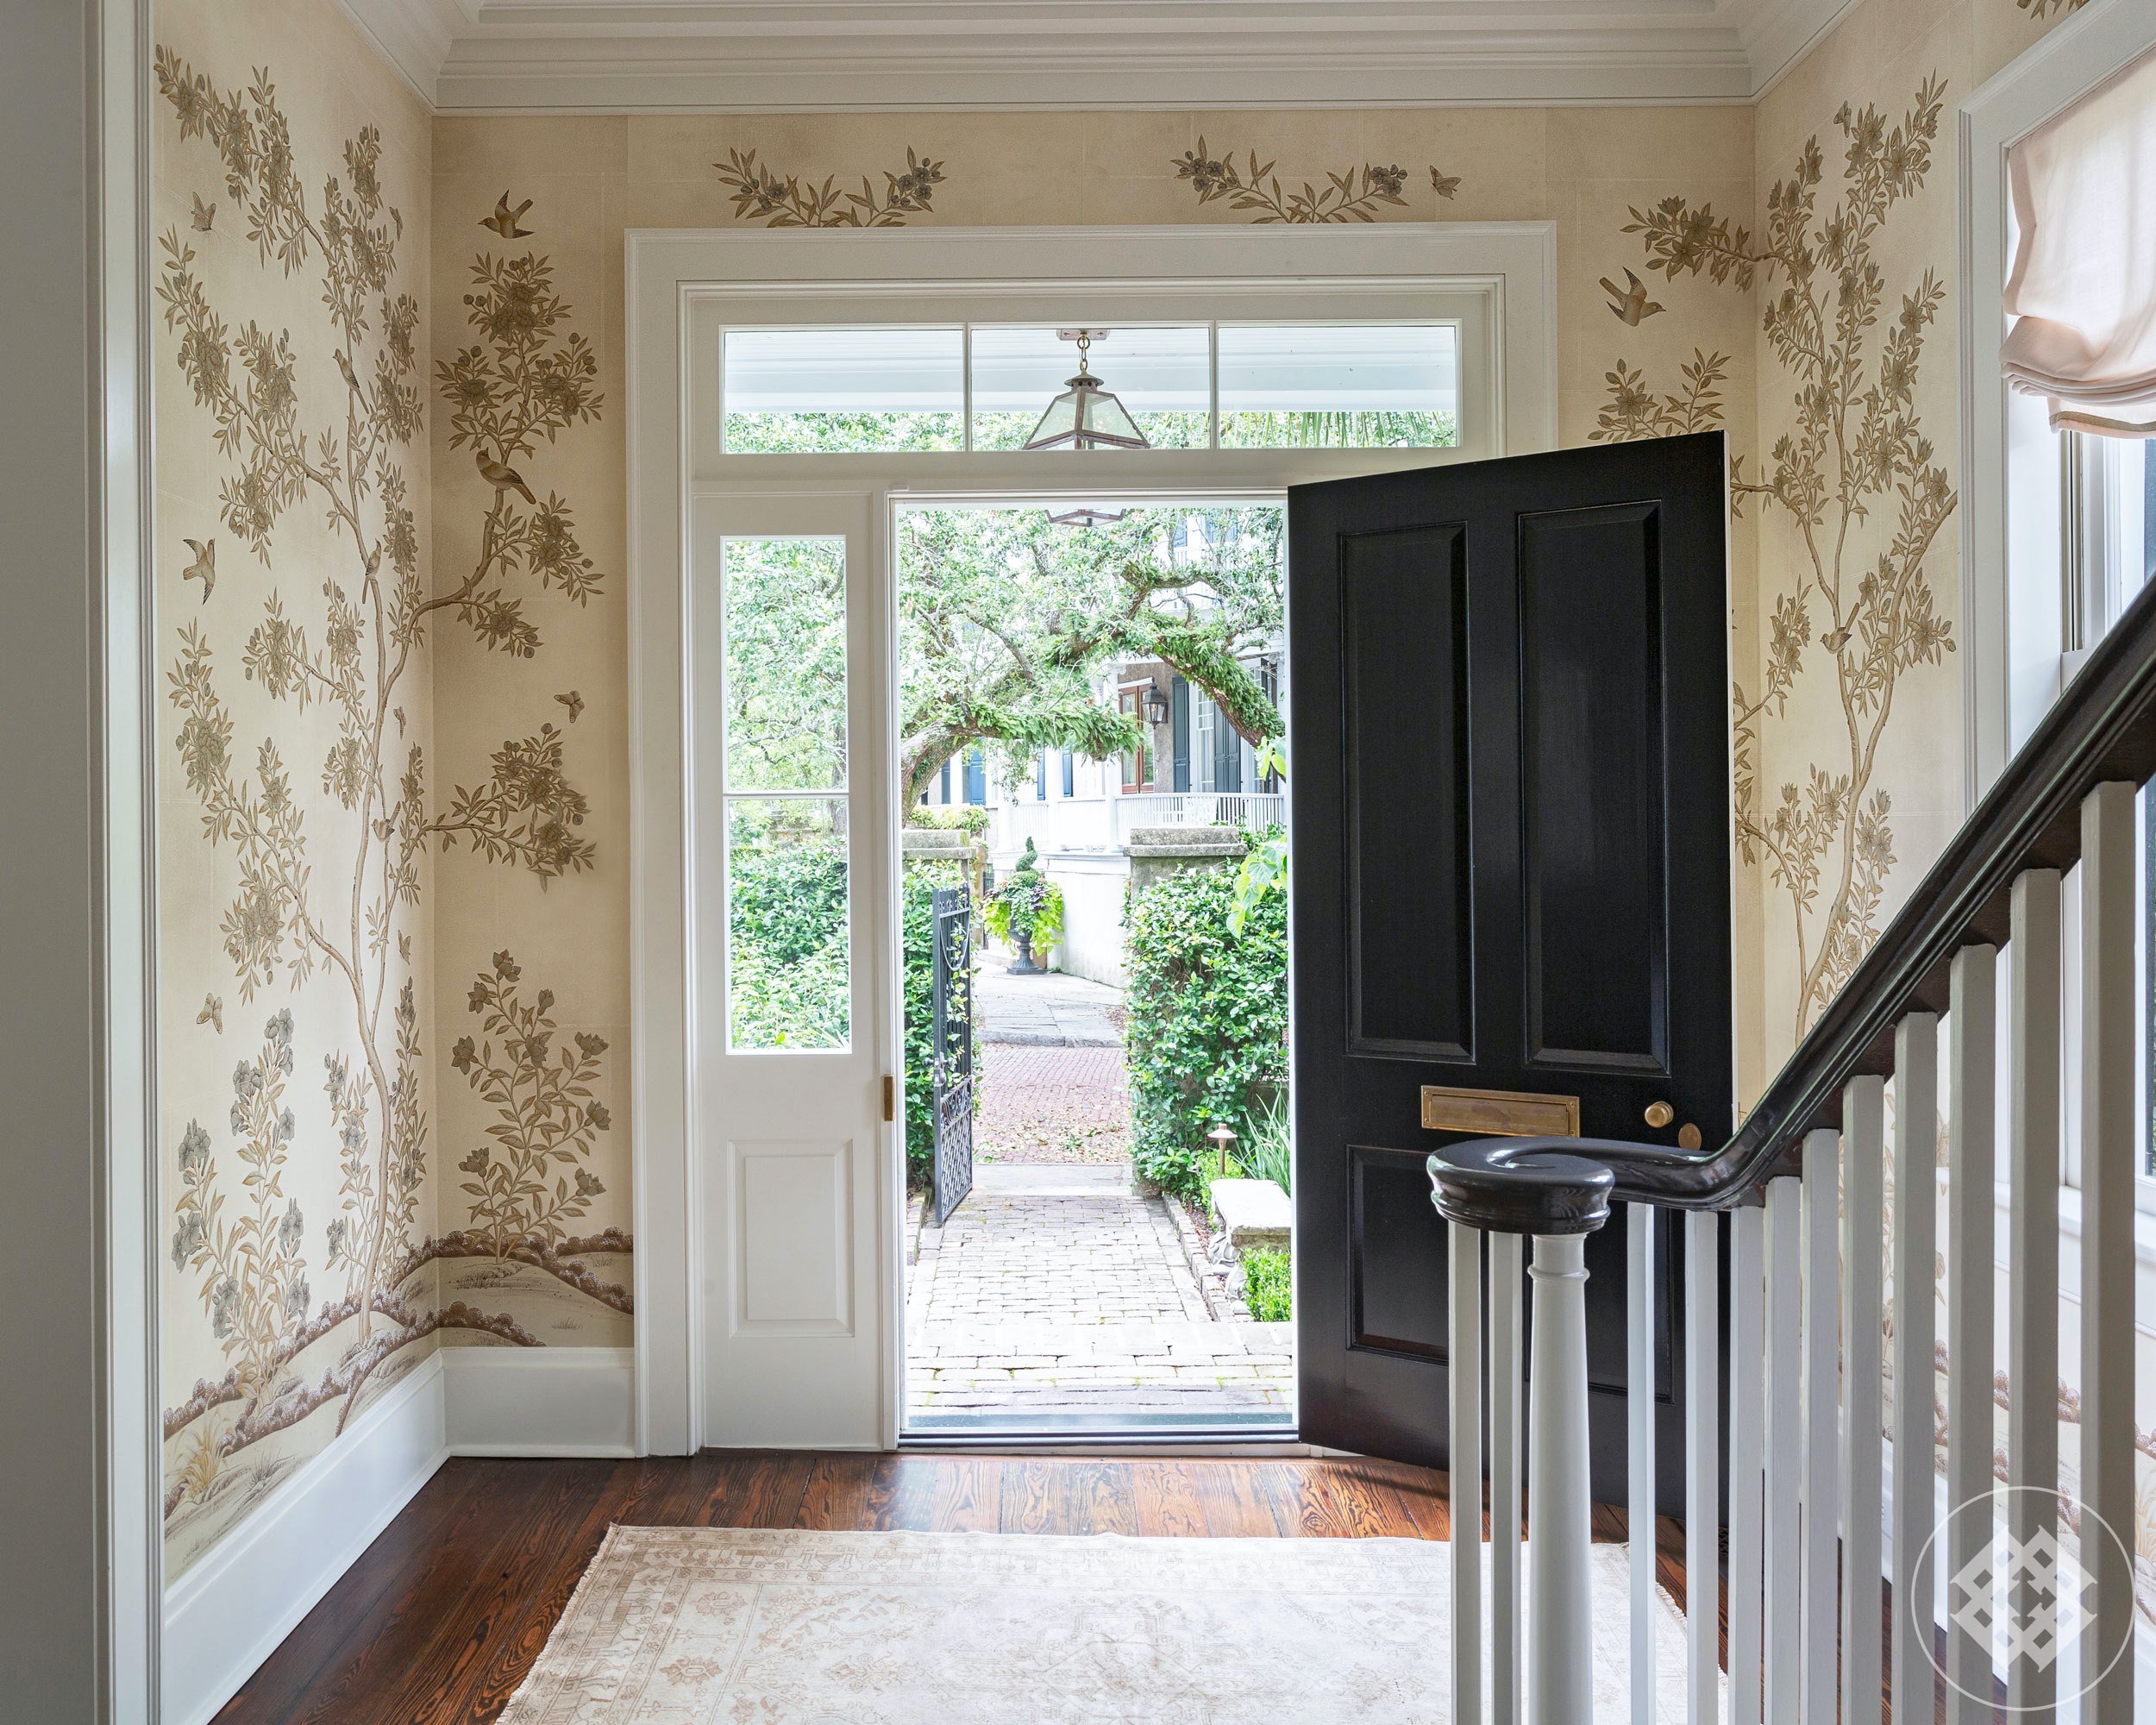 shc-custom-measured-and-painted-gracie-wallcovering-creates-dramatic-entryway-for-historic-charleston-home.jpg